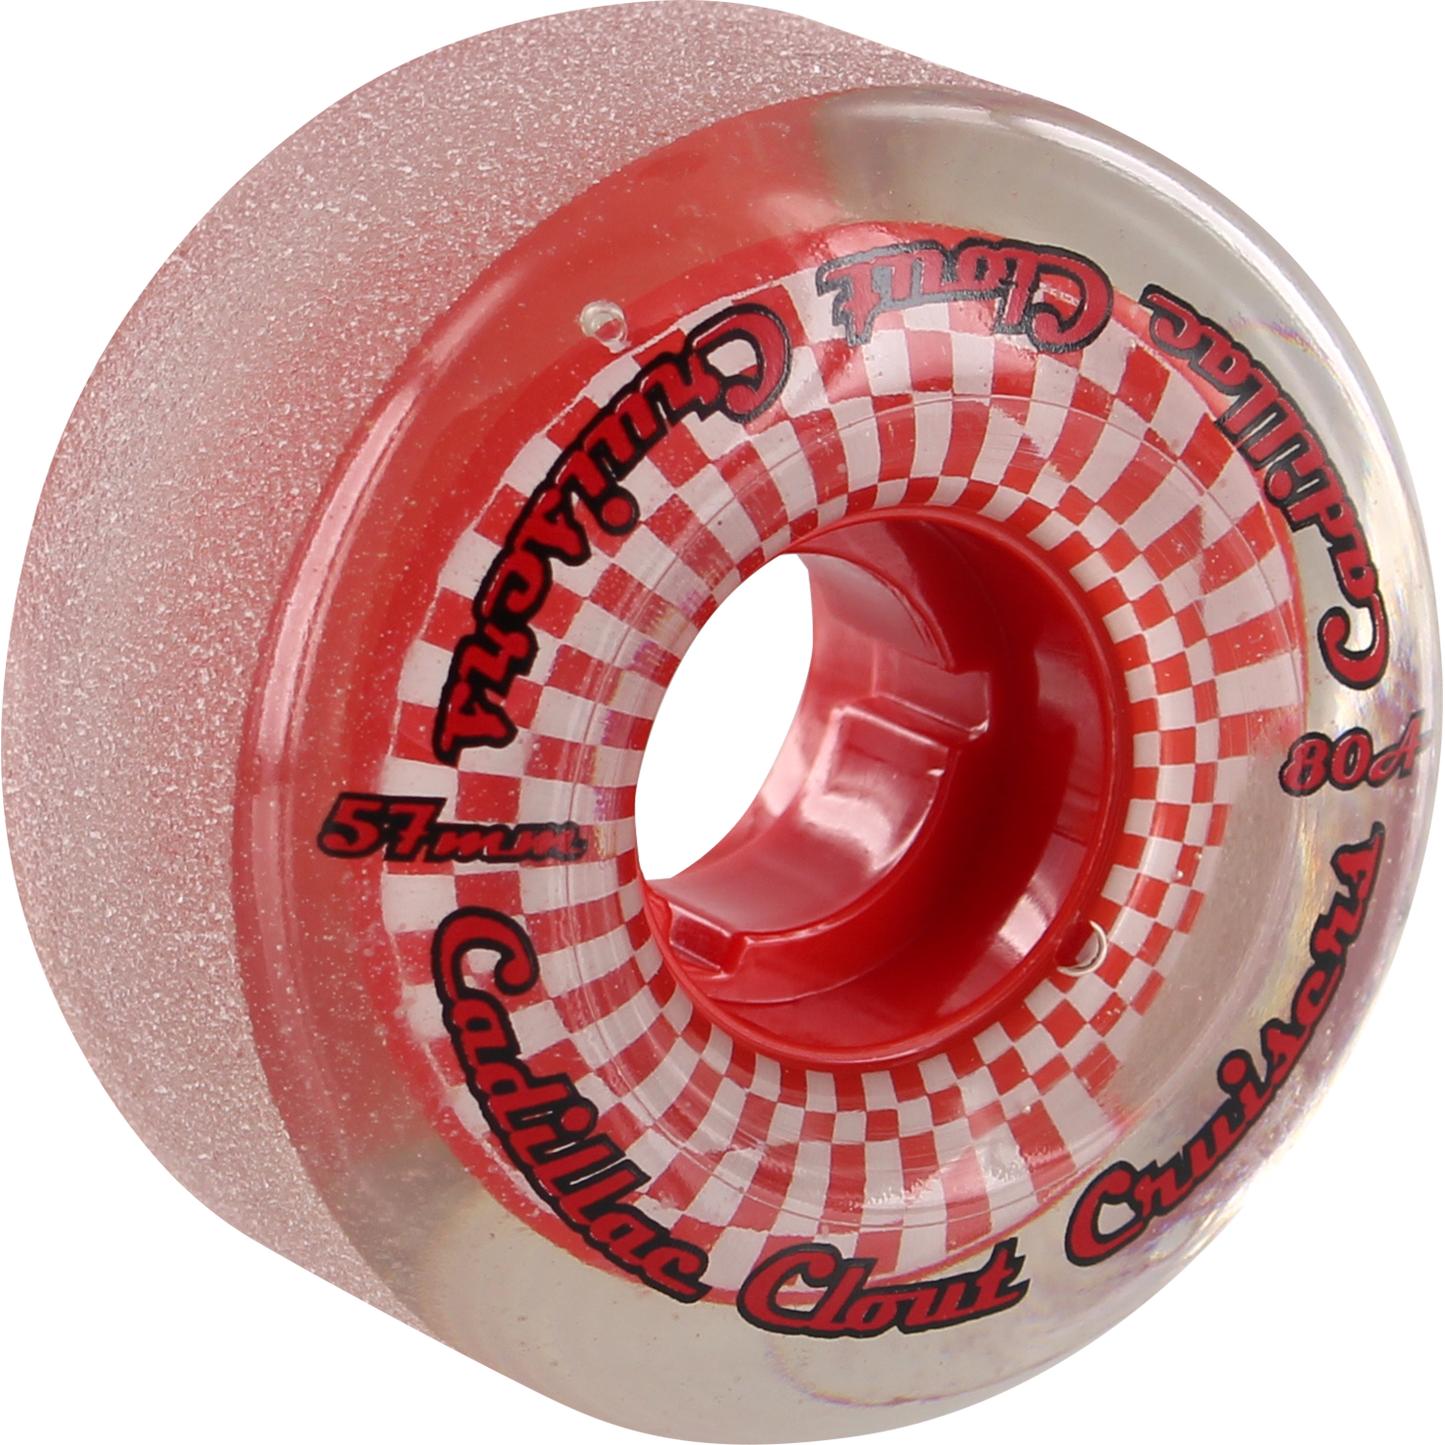 Cadillac Clout Cruisers 57mm 80a Smoke/Red Skateboard Wheels (Set of 4)